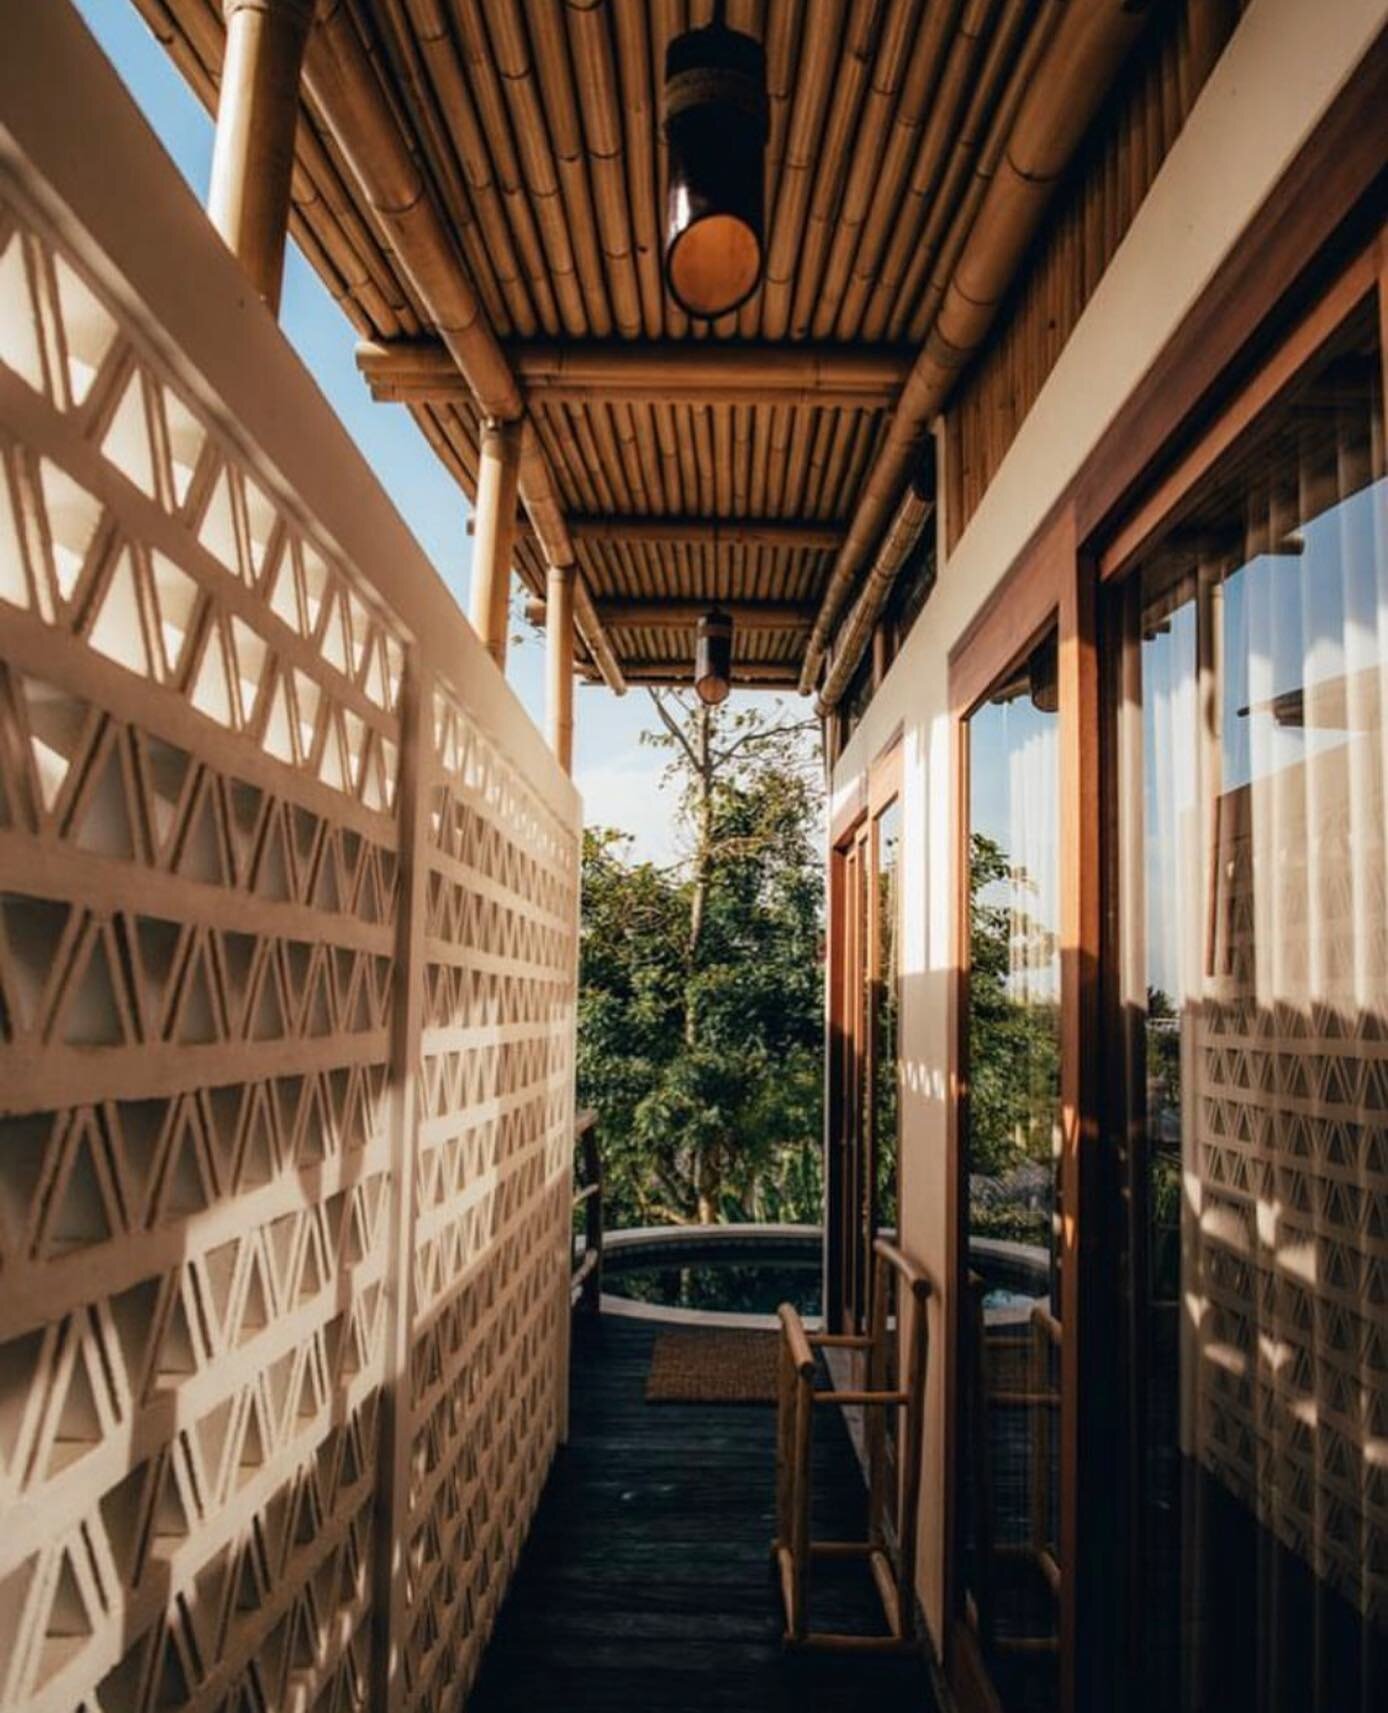 The morning sunshine filtering in through the breeze blocks in one of our one bedroom suites ✨

#bali #villa #balivillas #balivilla #balihotels